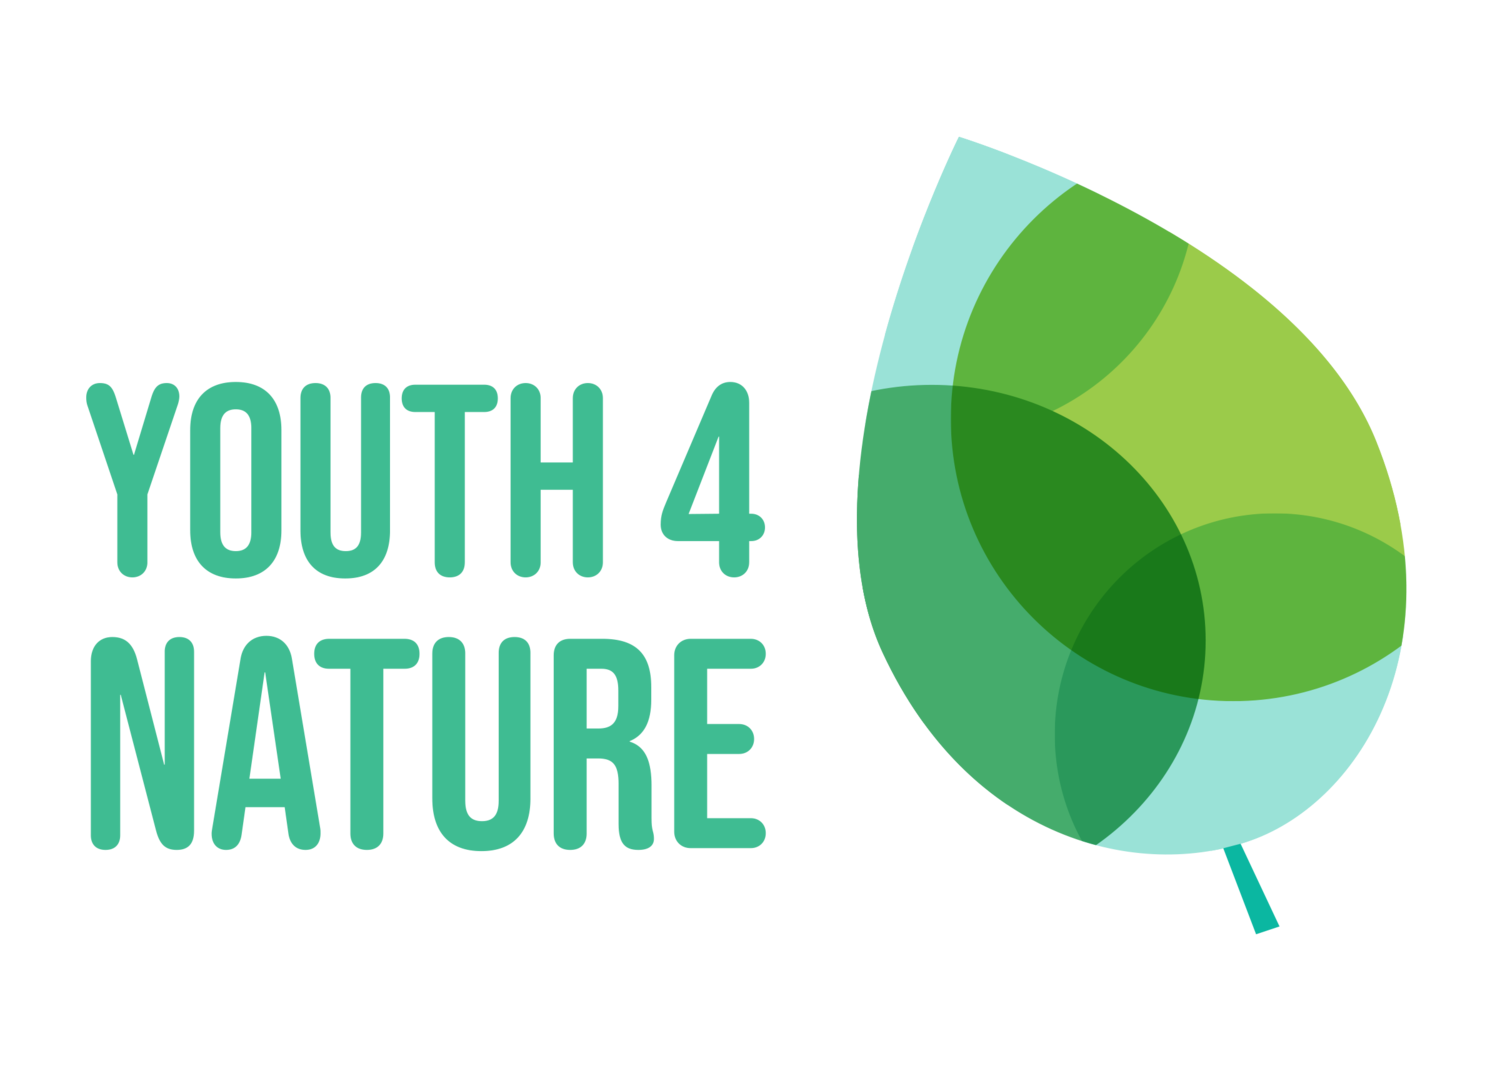 Youth4Nature+Colour+Logo+(Transparent+Background).png